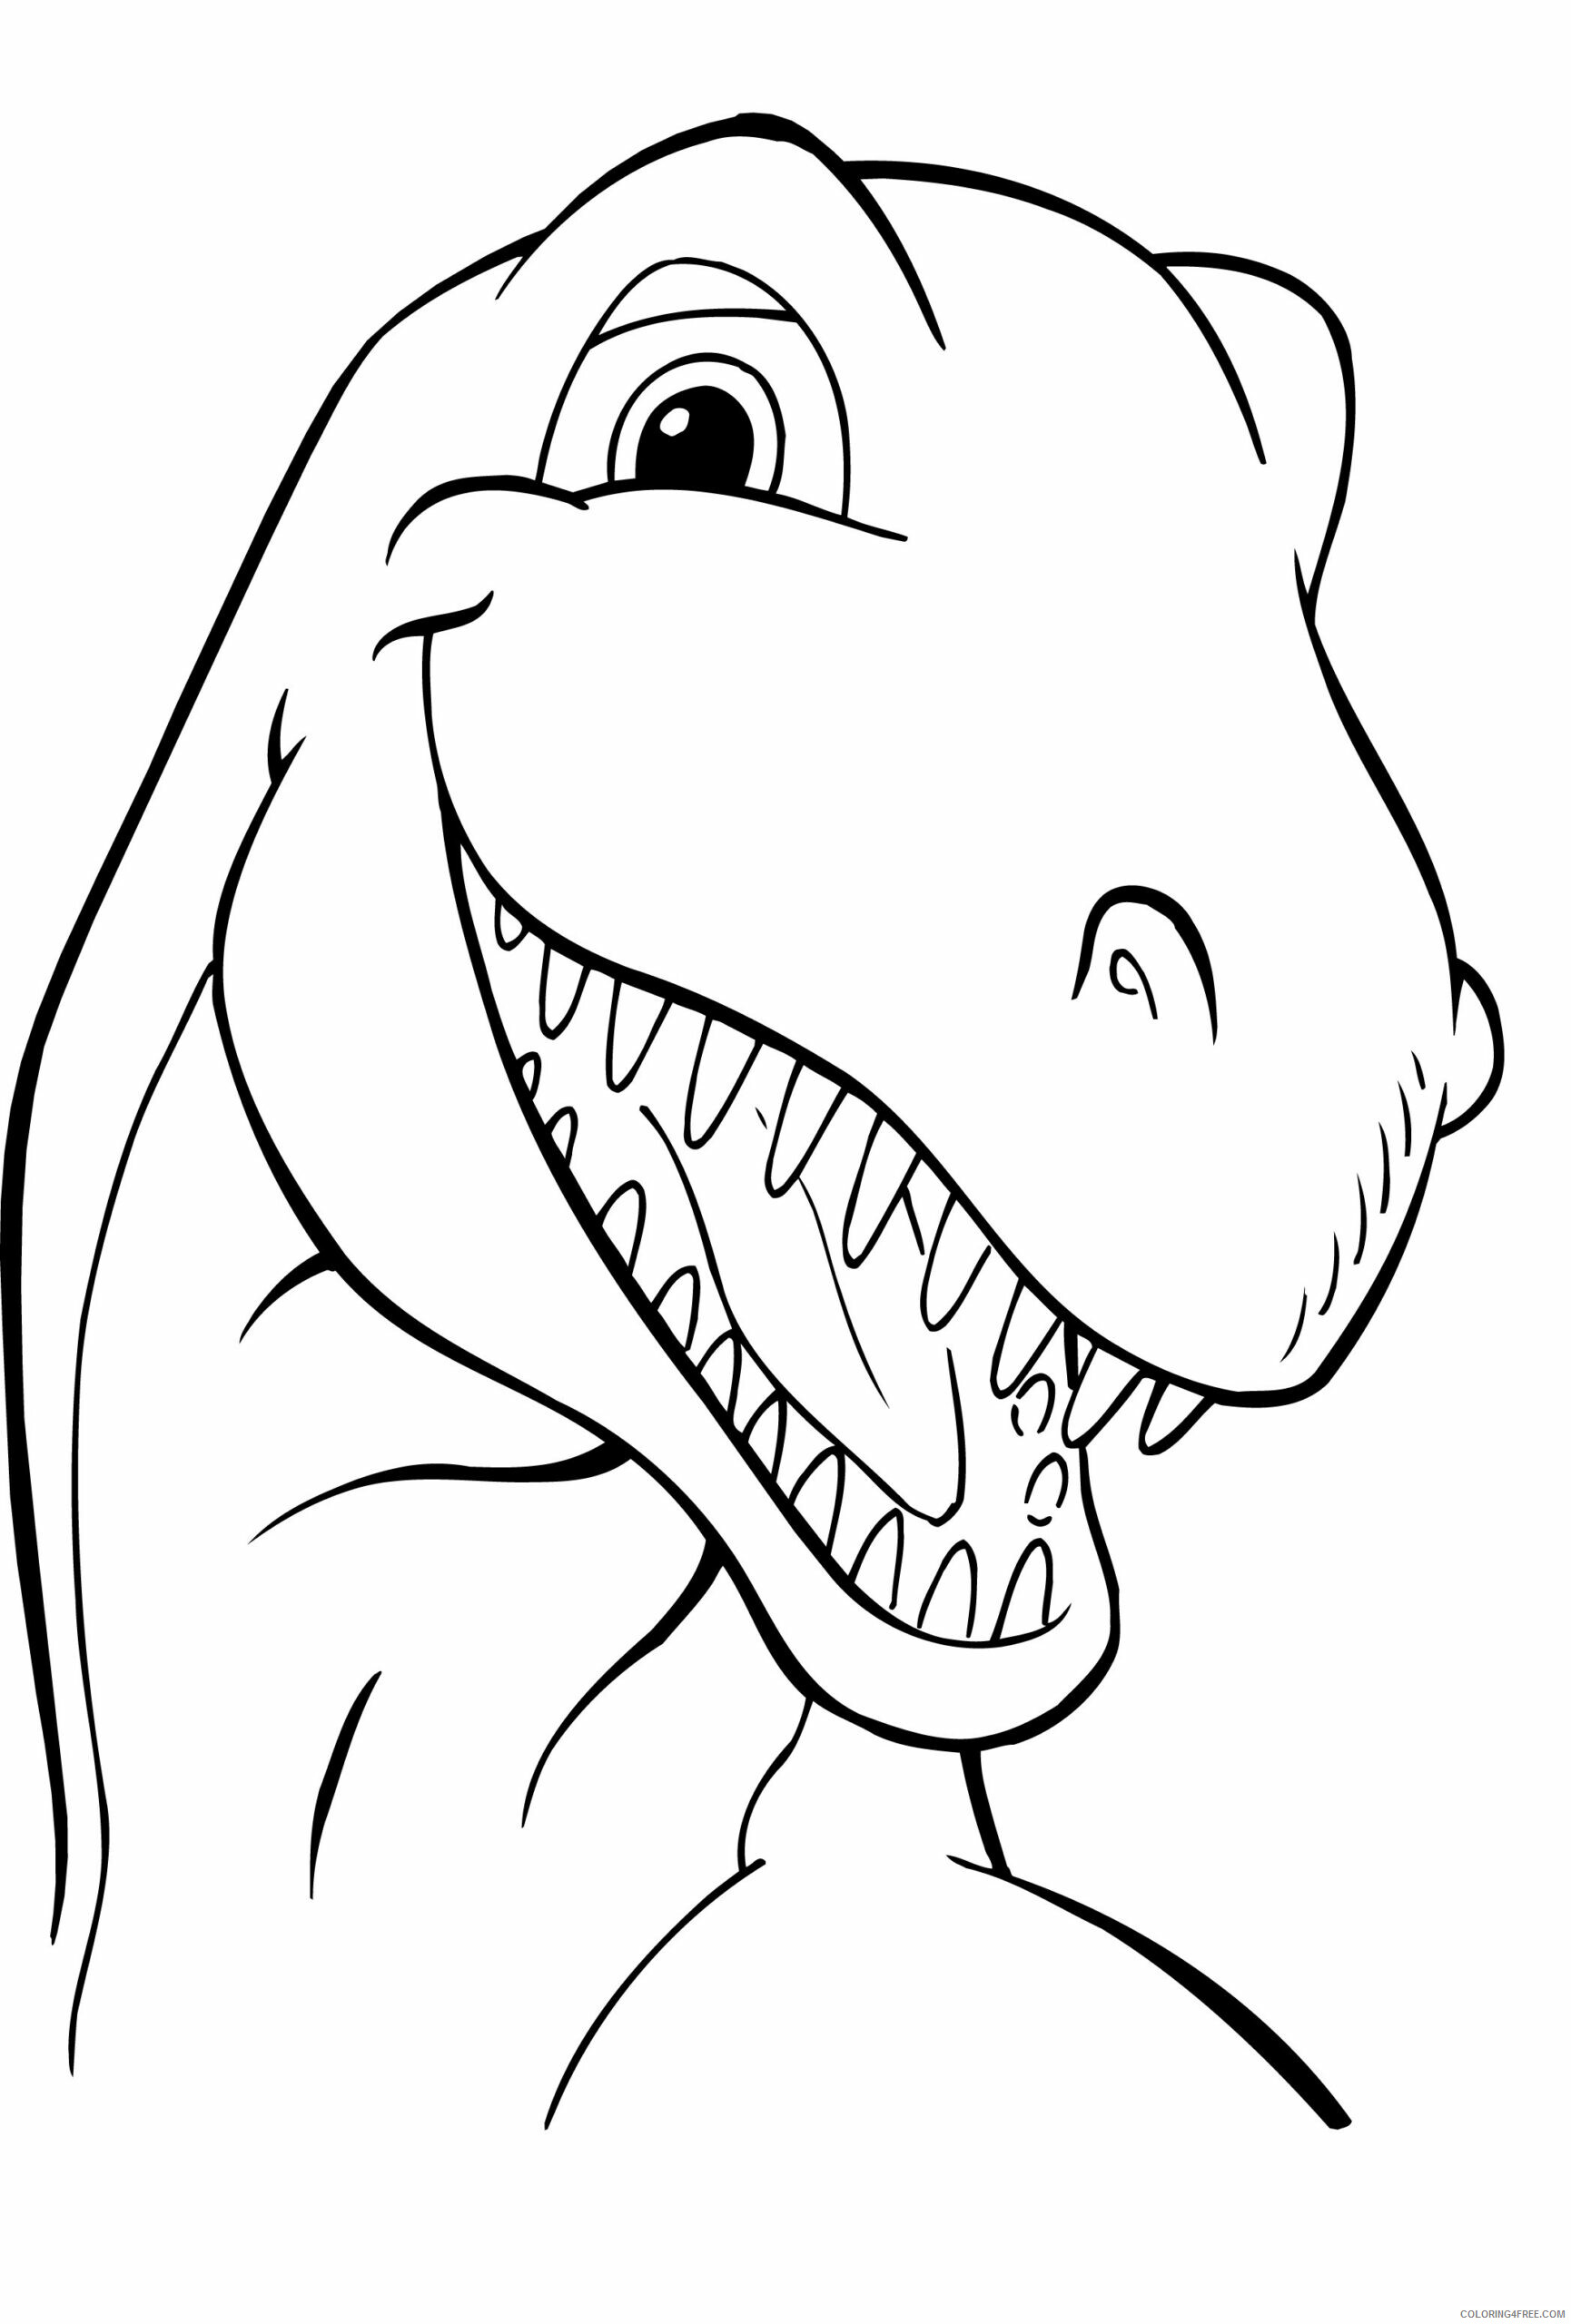 Dinosaurs Coloring Pages for boys Dinosaur Free Printable 2020 0268 Coloring4free